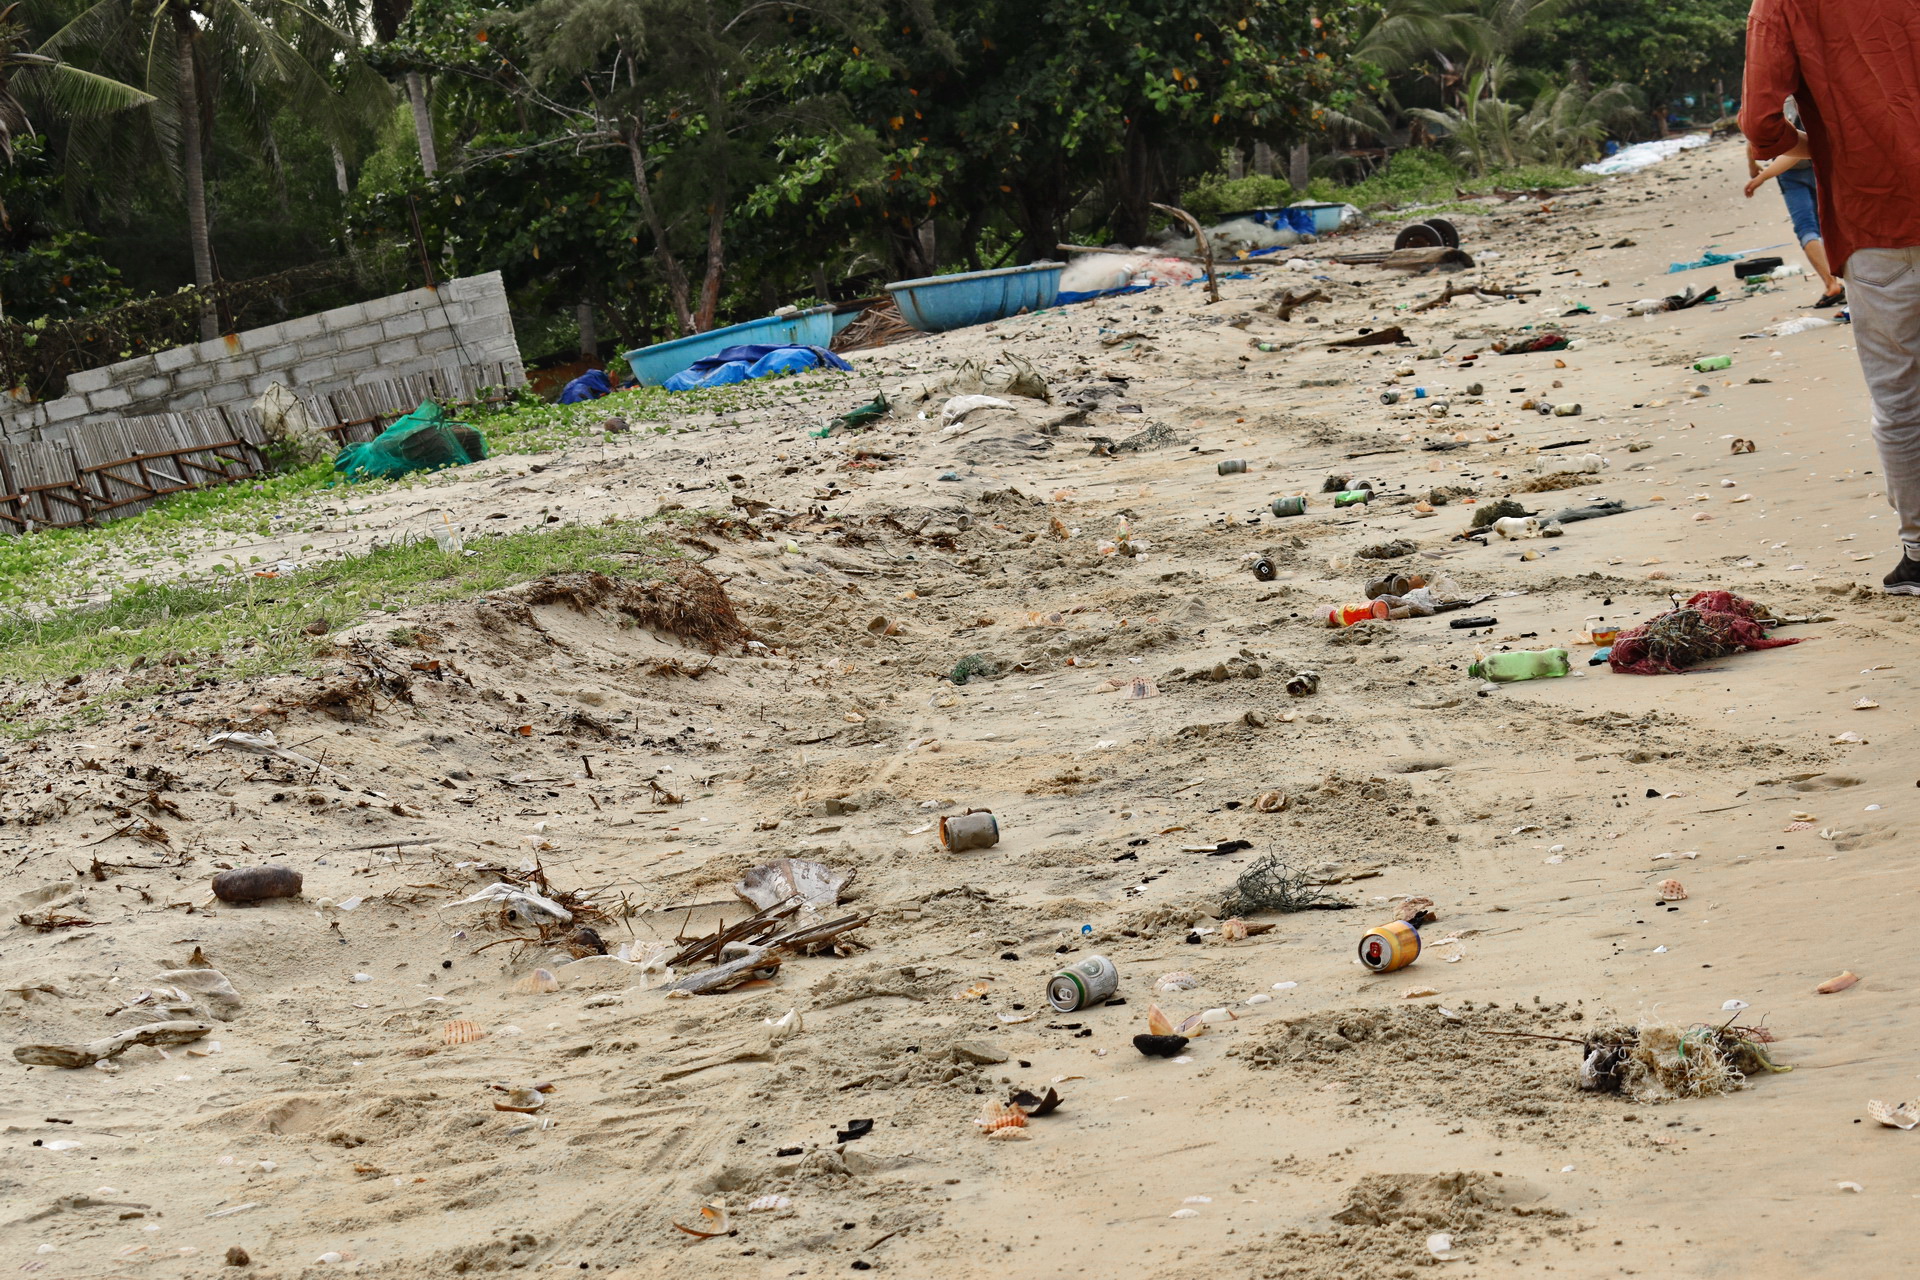 The Ke Ga Beach in Binh Thuan Province, Vietnam is littered with trash from human activities. Photo: Tuan Son / Tuoi Tre News